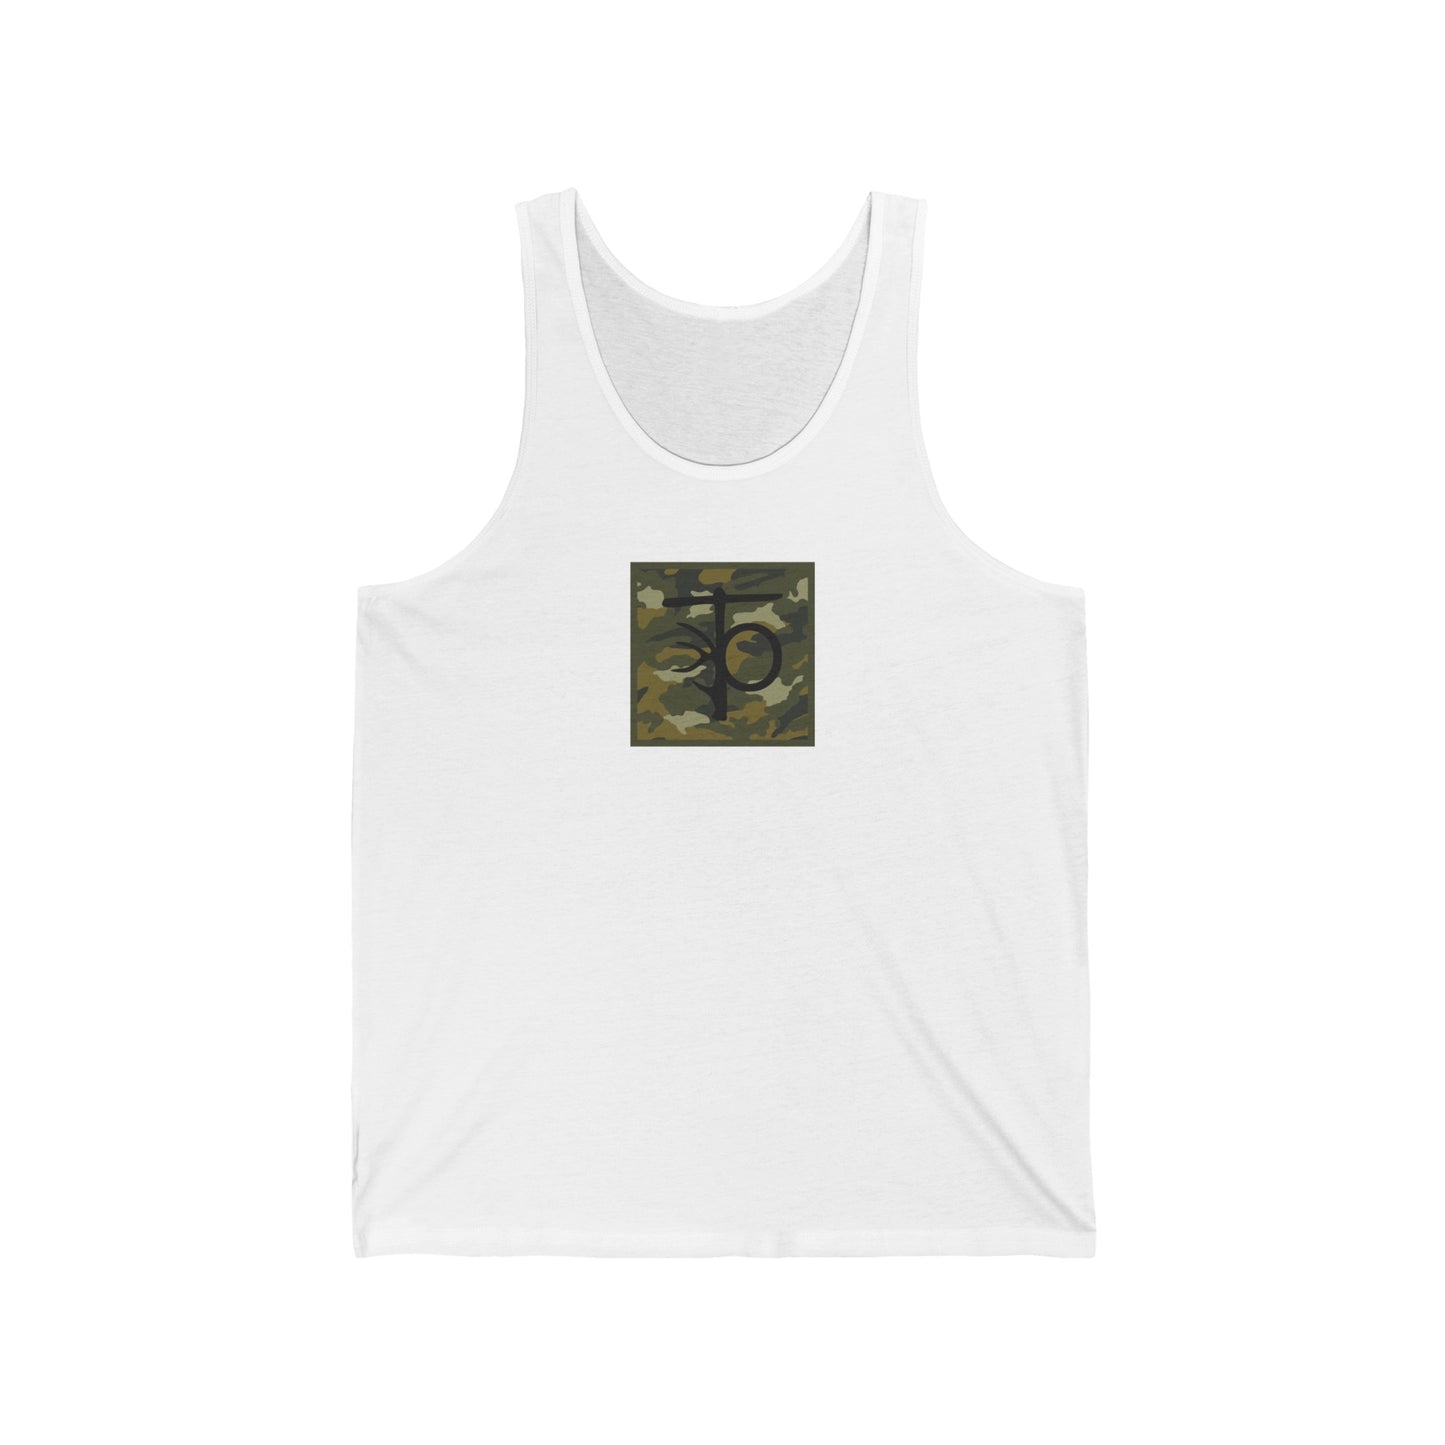 Camo Antlered TO Tank Top